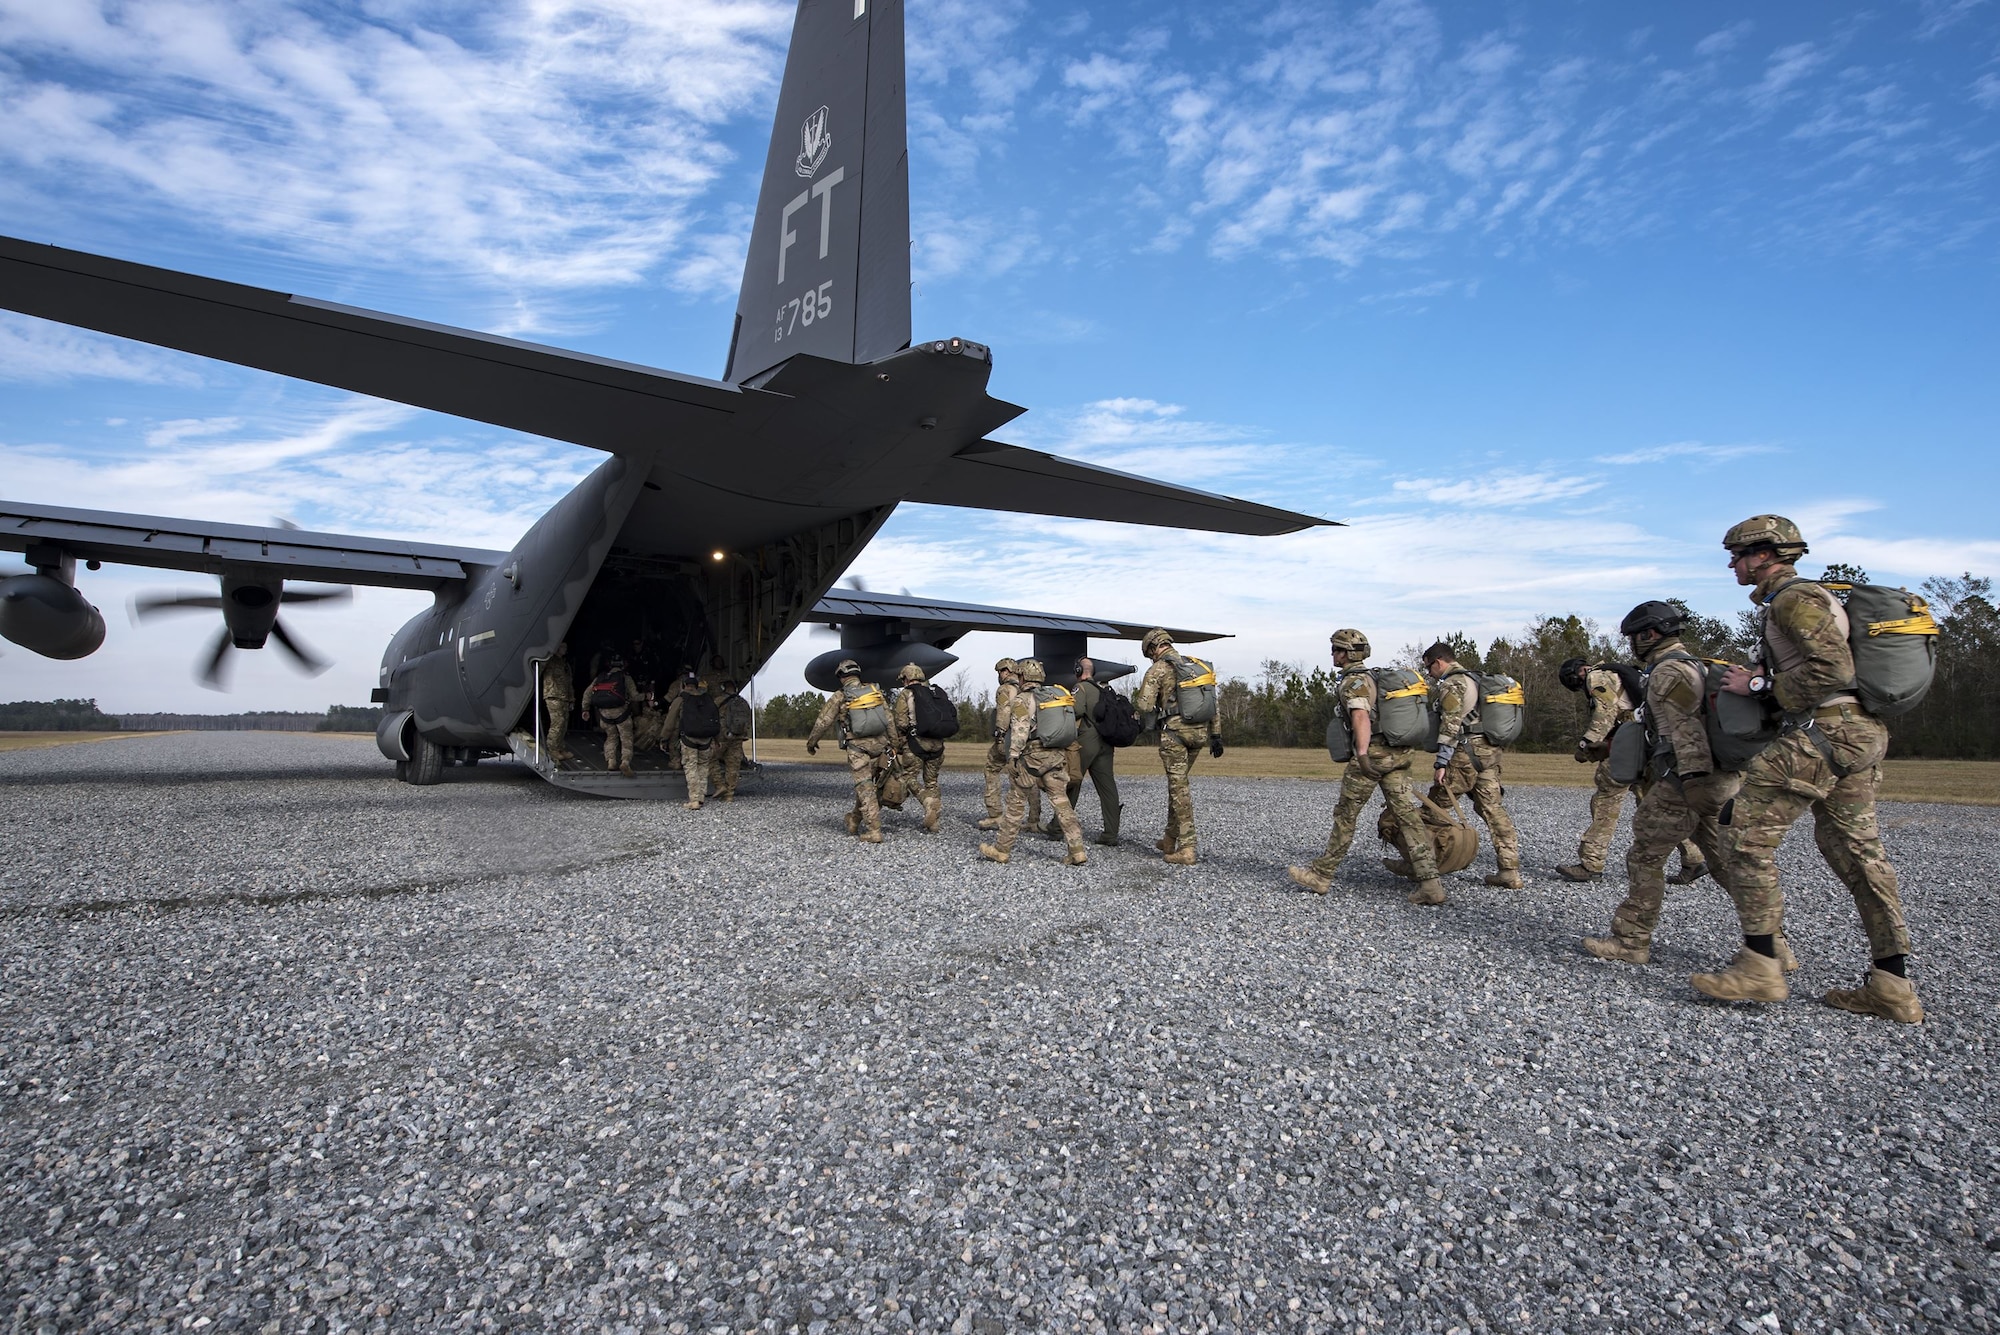 Pararescuemen from the 38th Rescue Squadron (RQS) enter an HC-130J Combat King II during a full mission profile exercise, Dec. 14, 2017, at Moody Air Force Base, Ga. During the training, the 38th RQS recovered victims while under enemy fire to prepare for future search and rescue missions and to assess their unit’s ability to work cohesively to accomplish the mission. (U.S. Air Force photo by Airman Eugene Oliver)